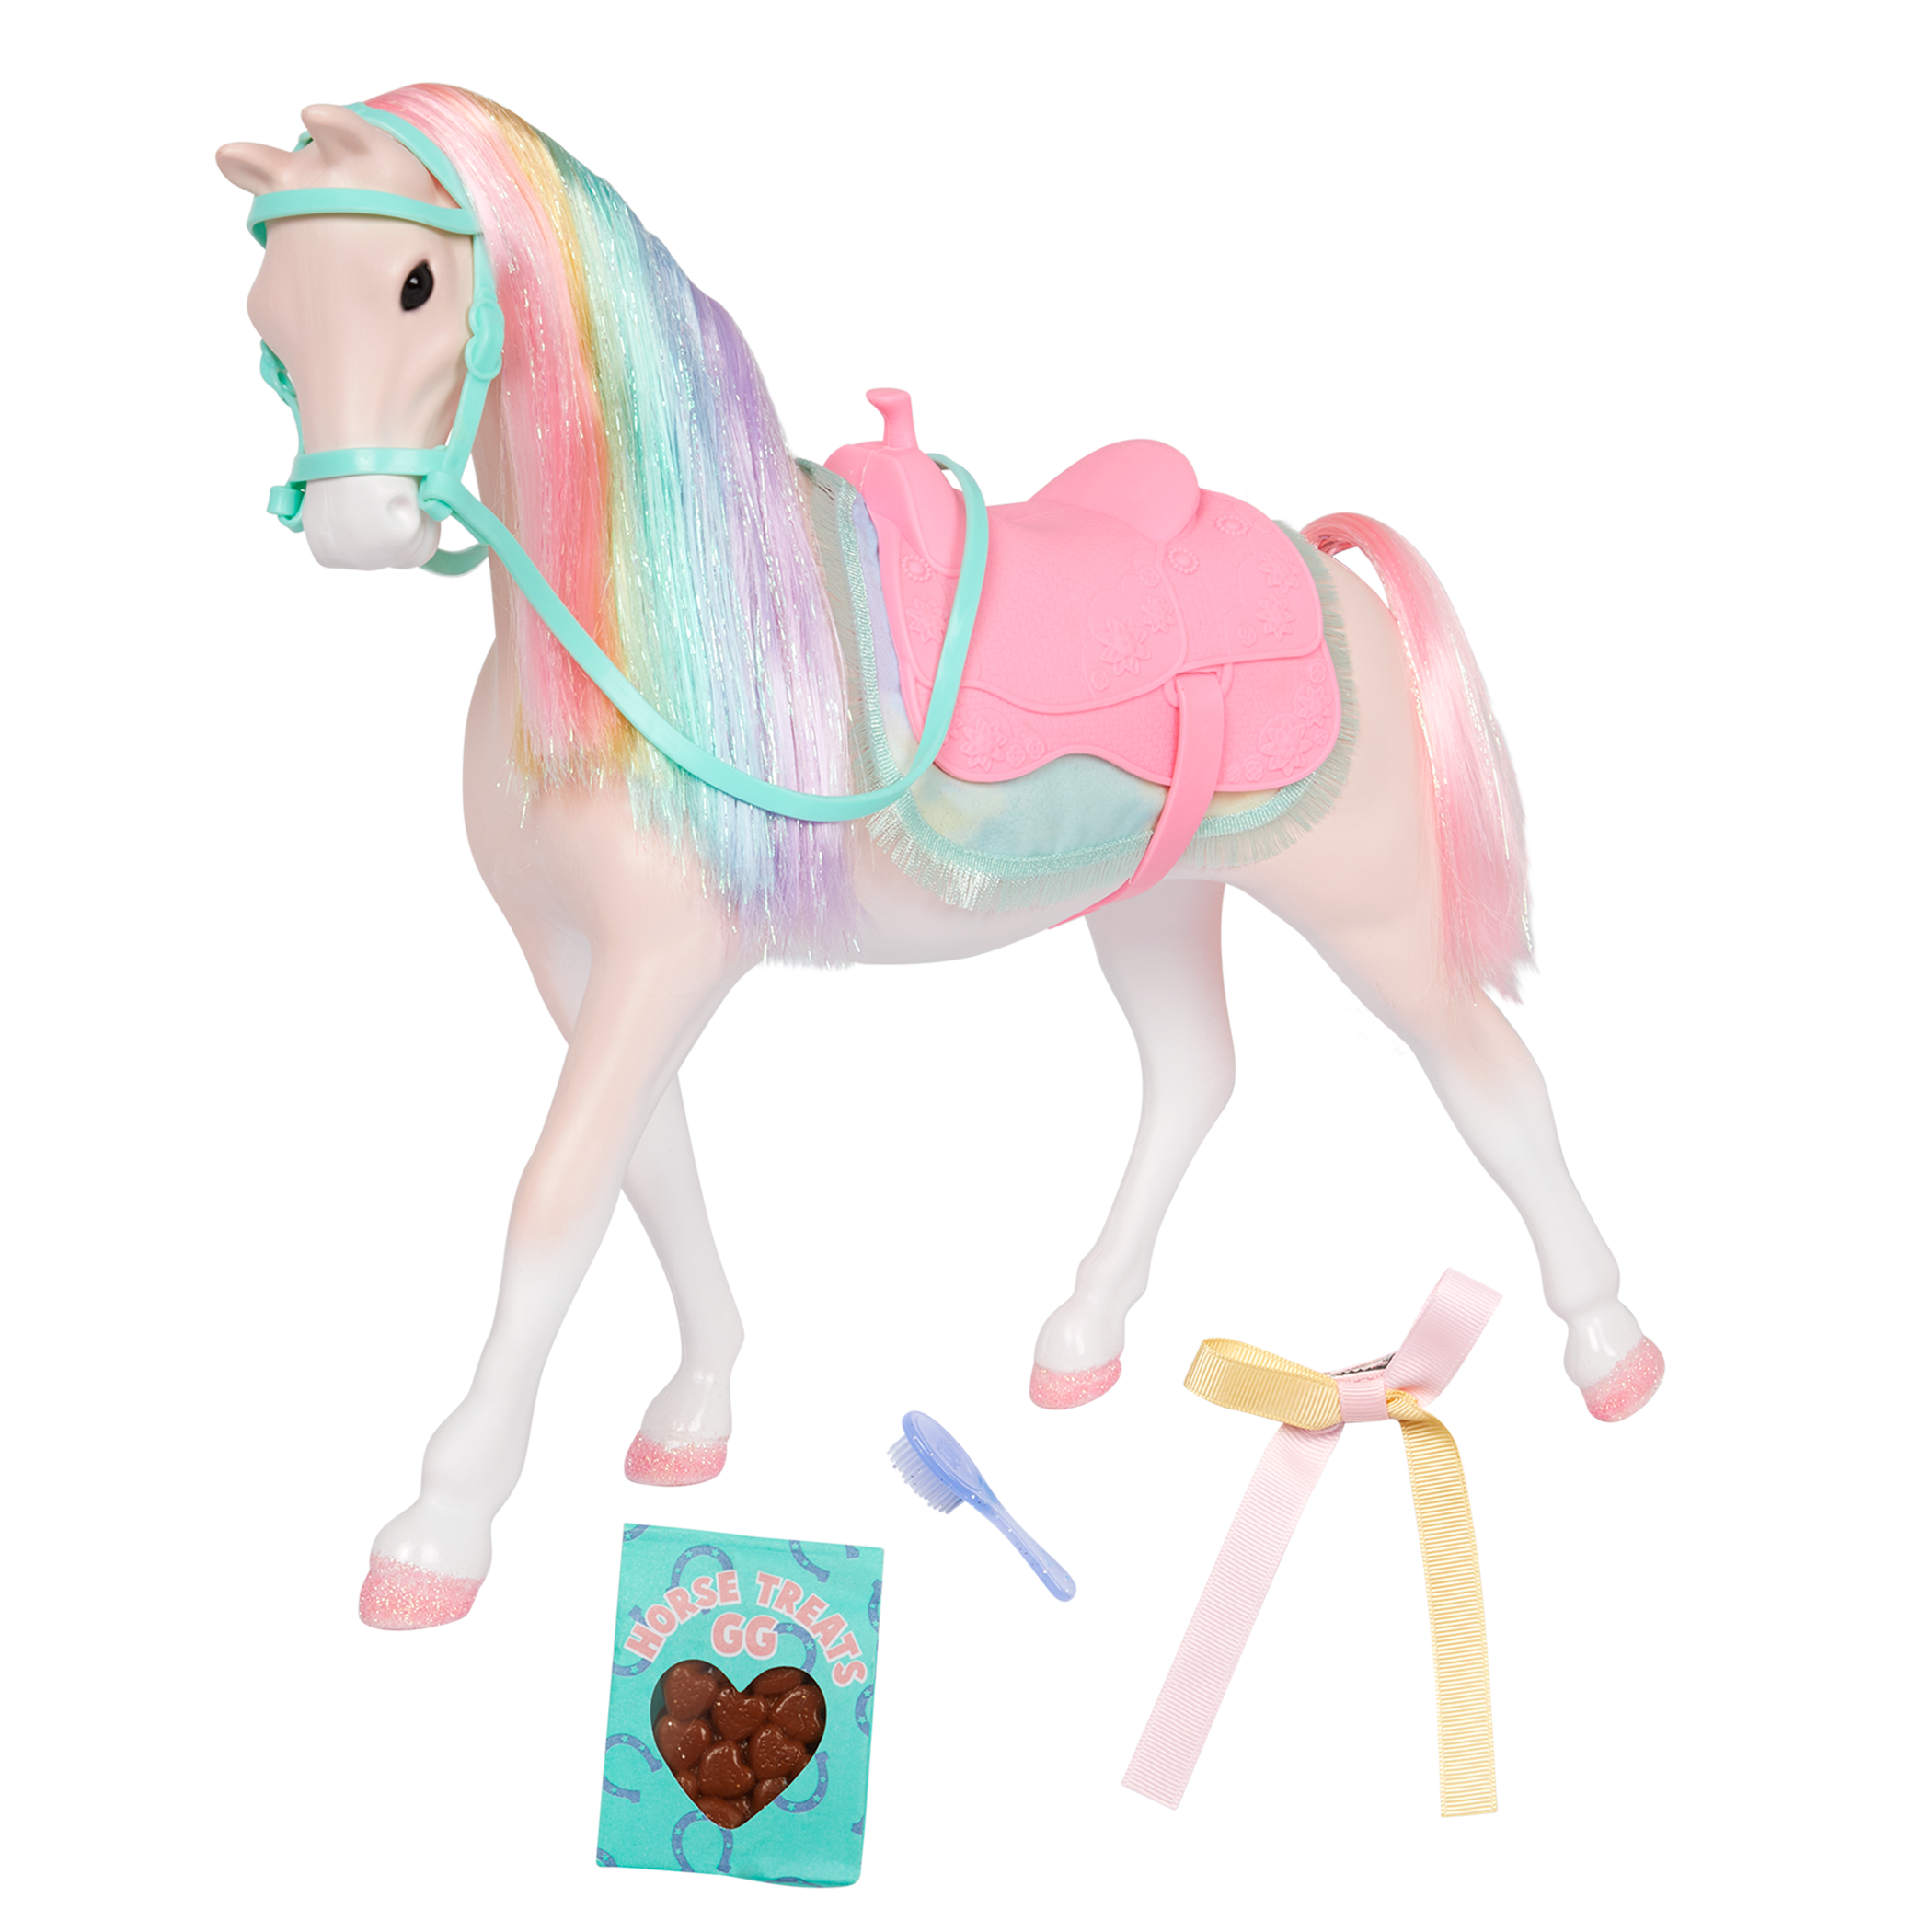 MADE BY ME Made By Me Paint & Display glitter ceramic Horses Activity Kit  for Kids, Perfect DIY Horse Toys, Playdates and Sleepovers Ages 6